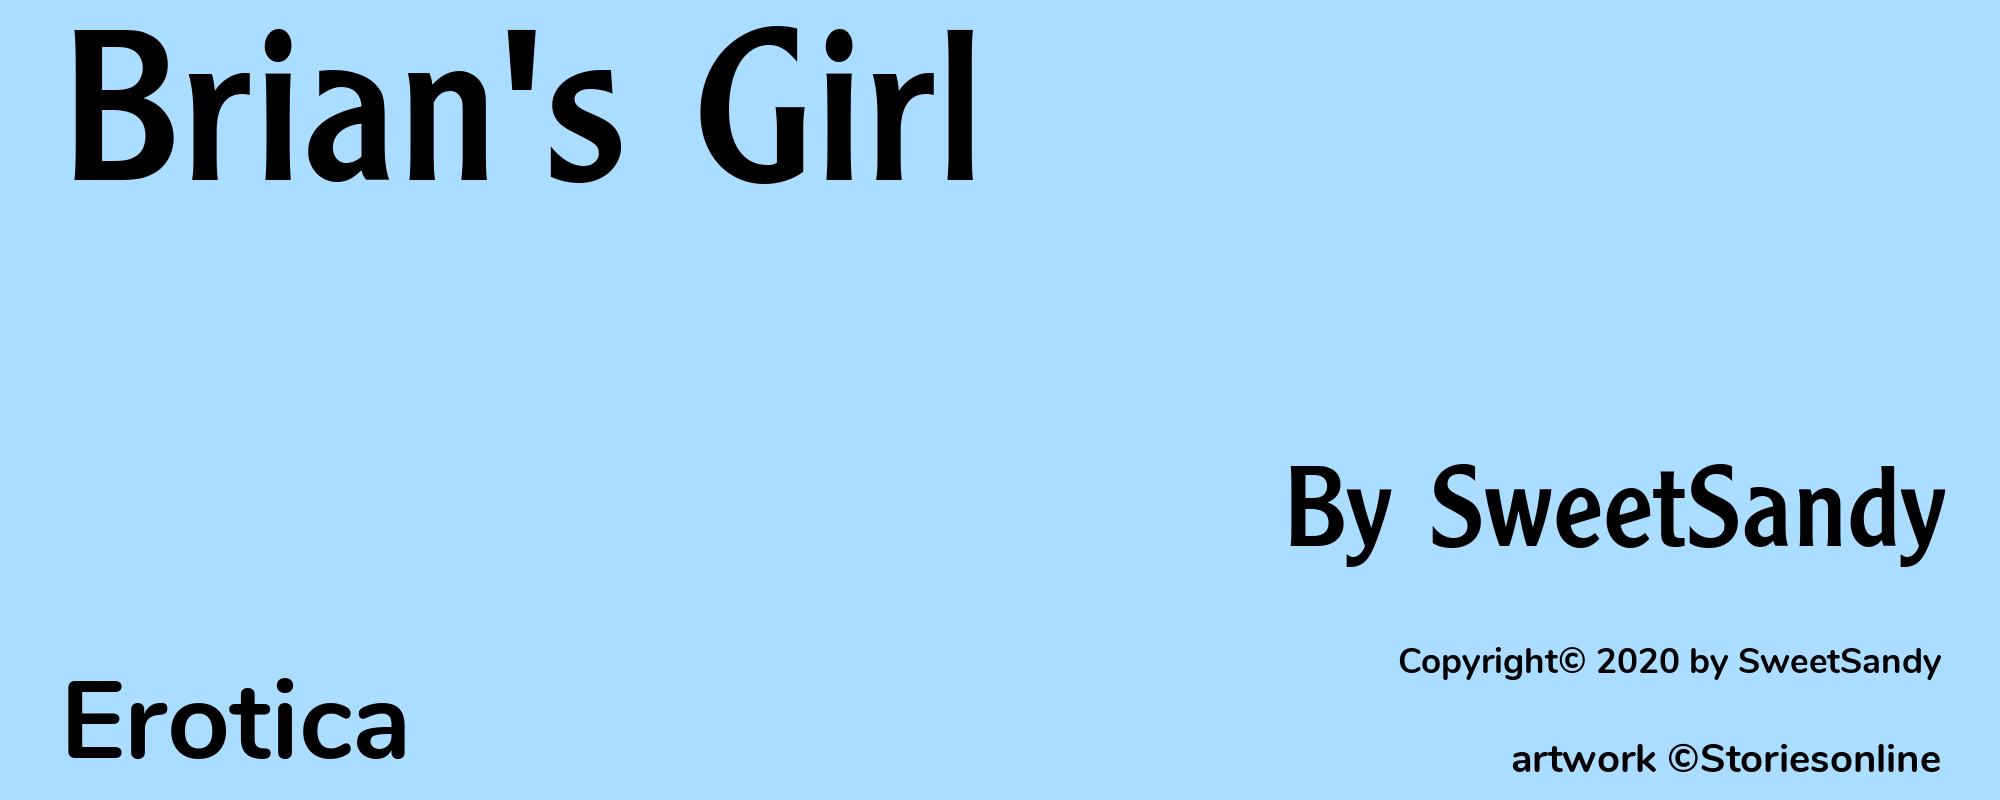 Brian's Girl - Cover